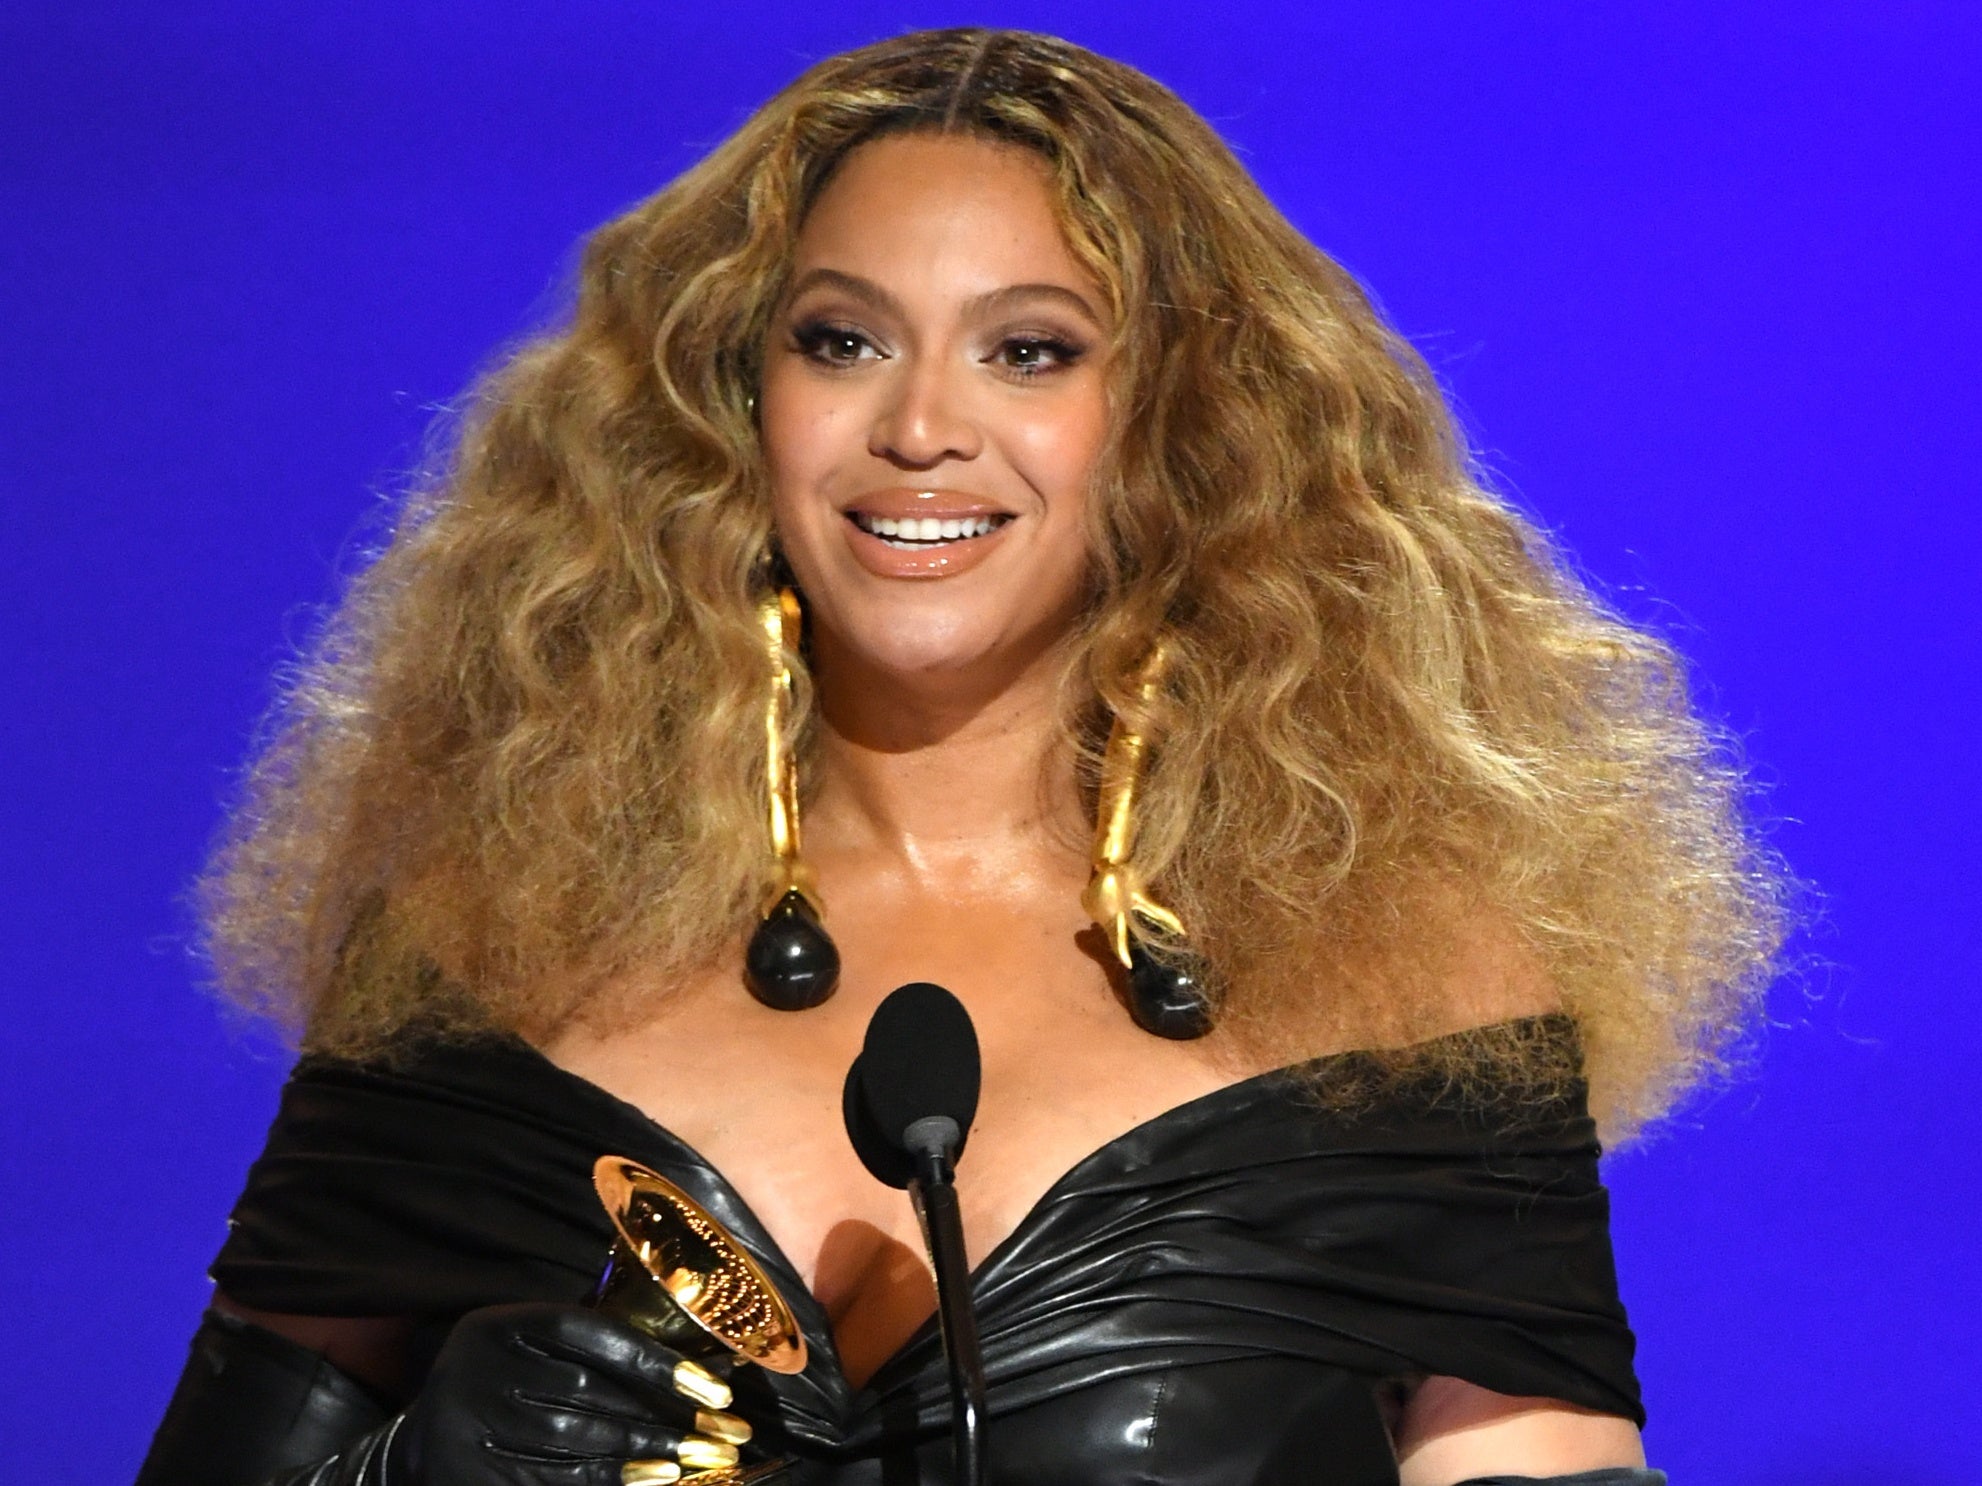 Beyoncé Has Now Won The Most Awards Of Any Female Artist In Grammy History